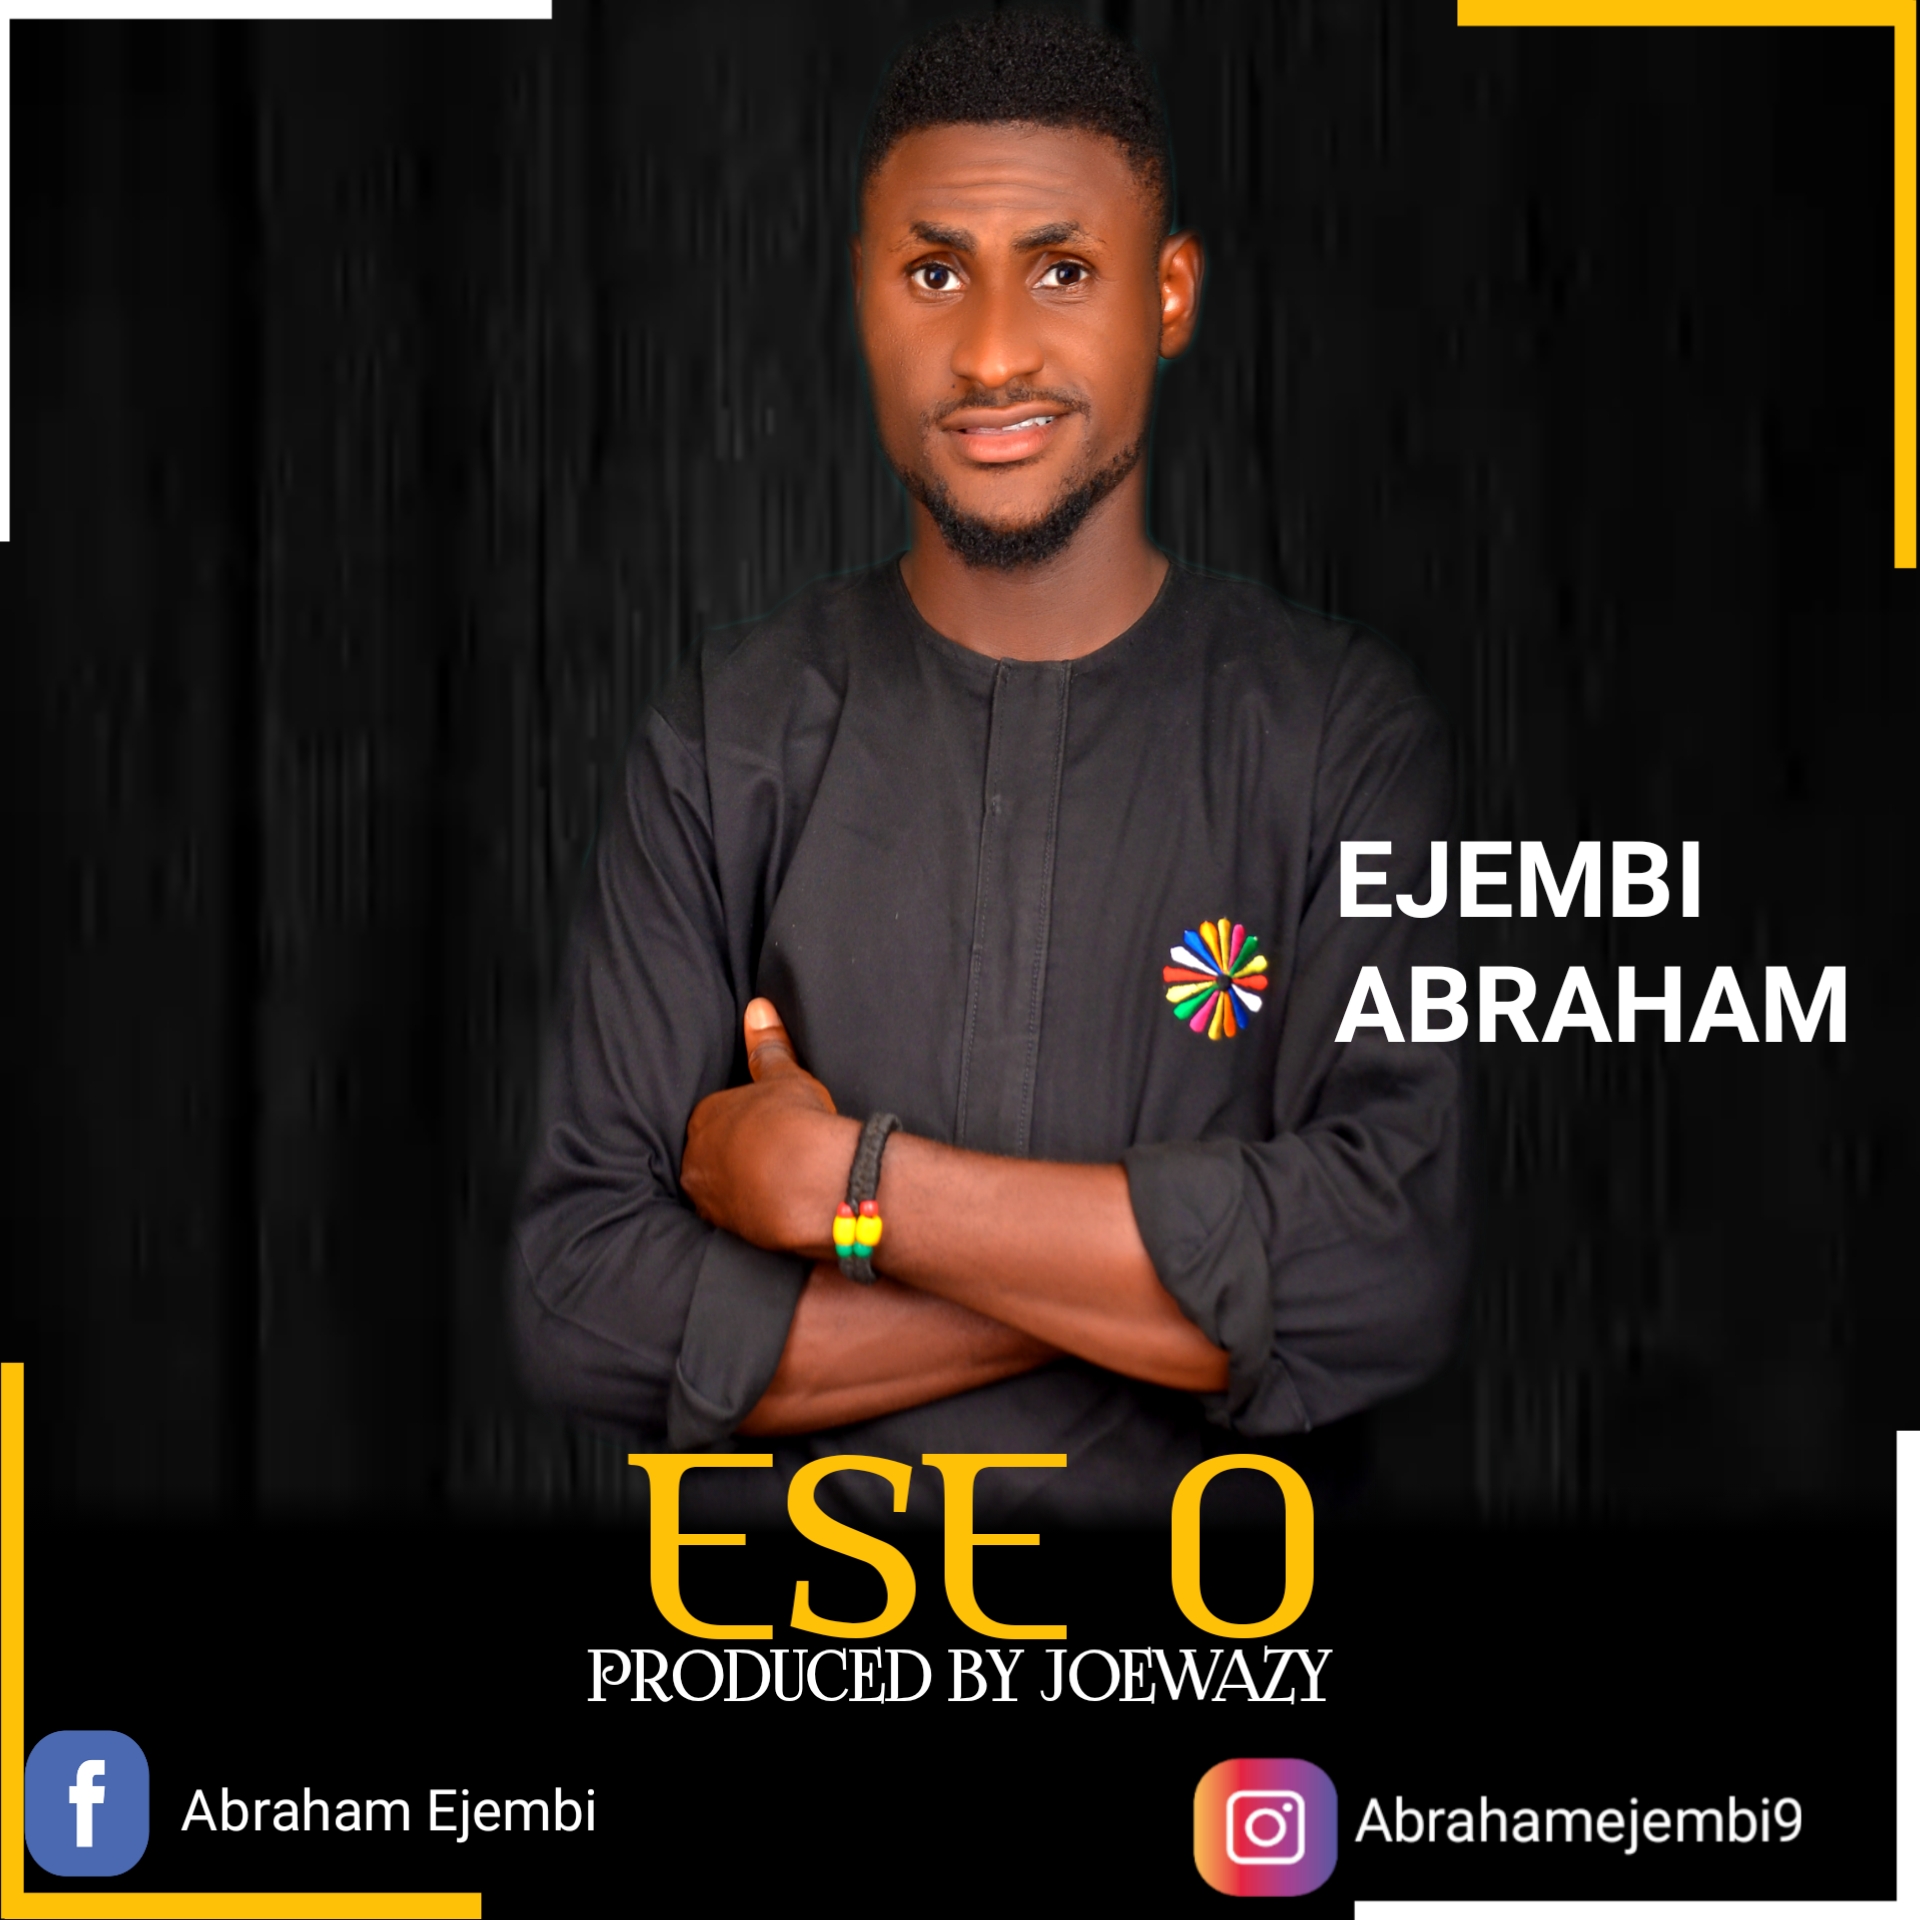 [New Release] Download ESE O by EJEMBI ABRAHAM 18